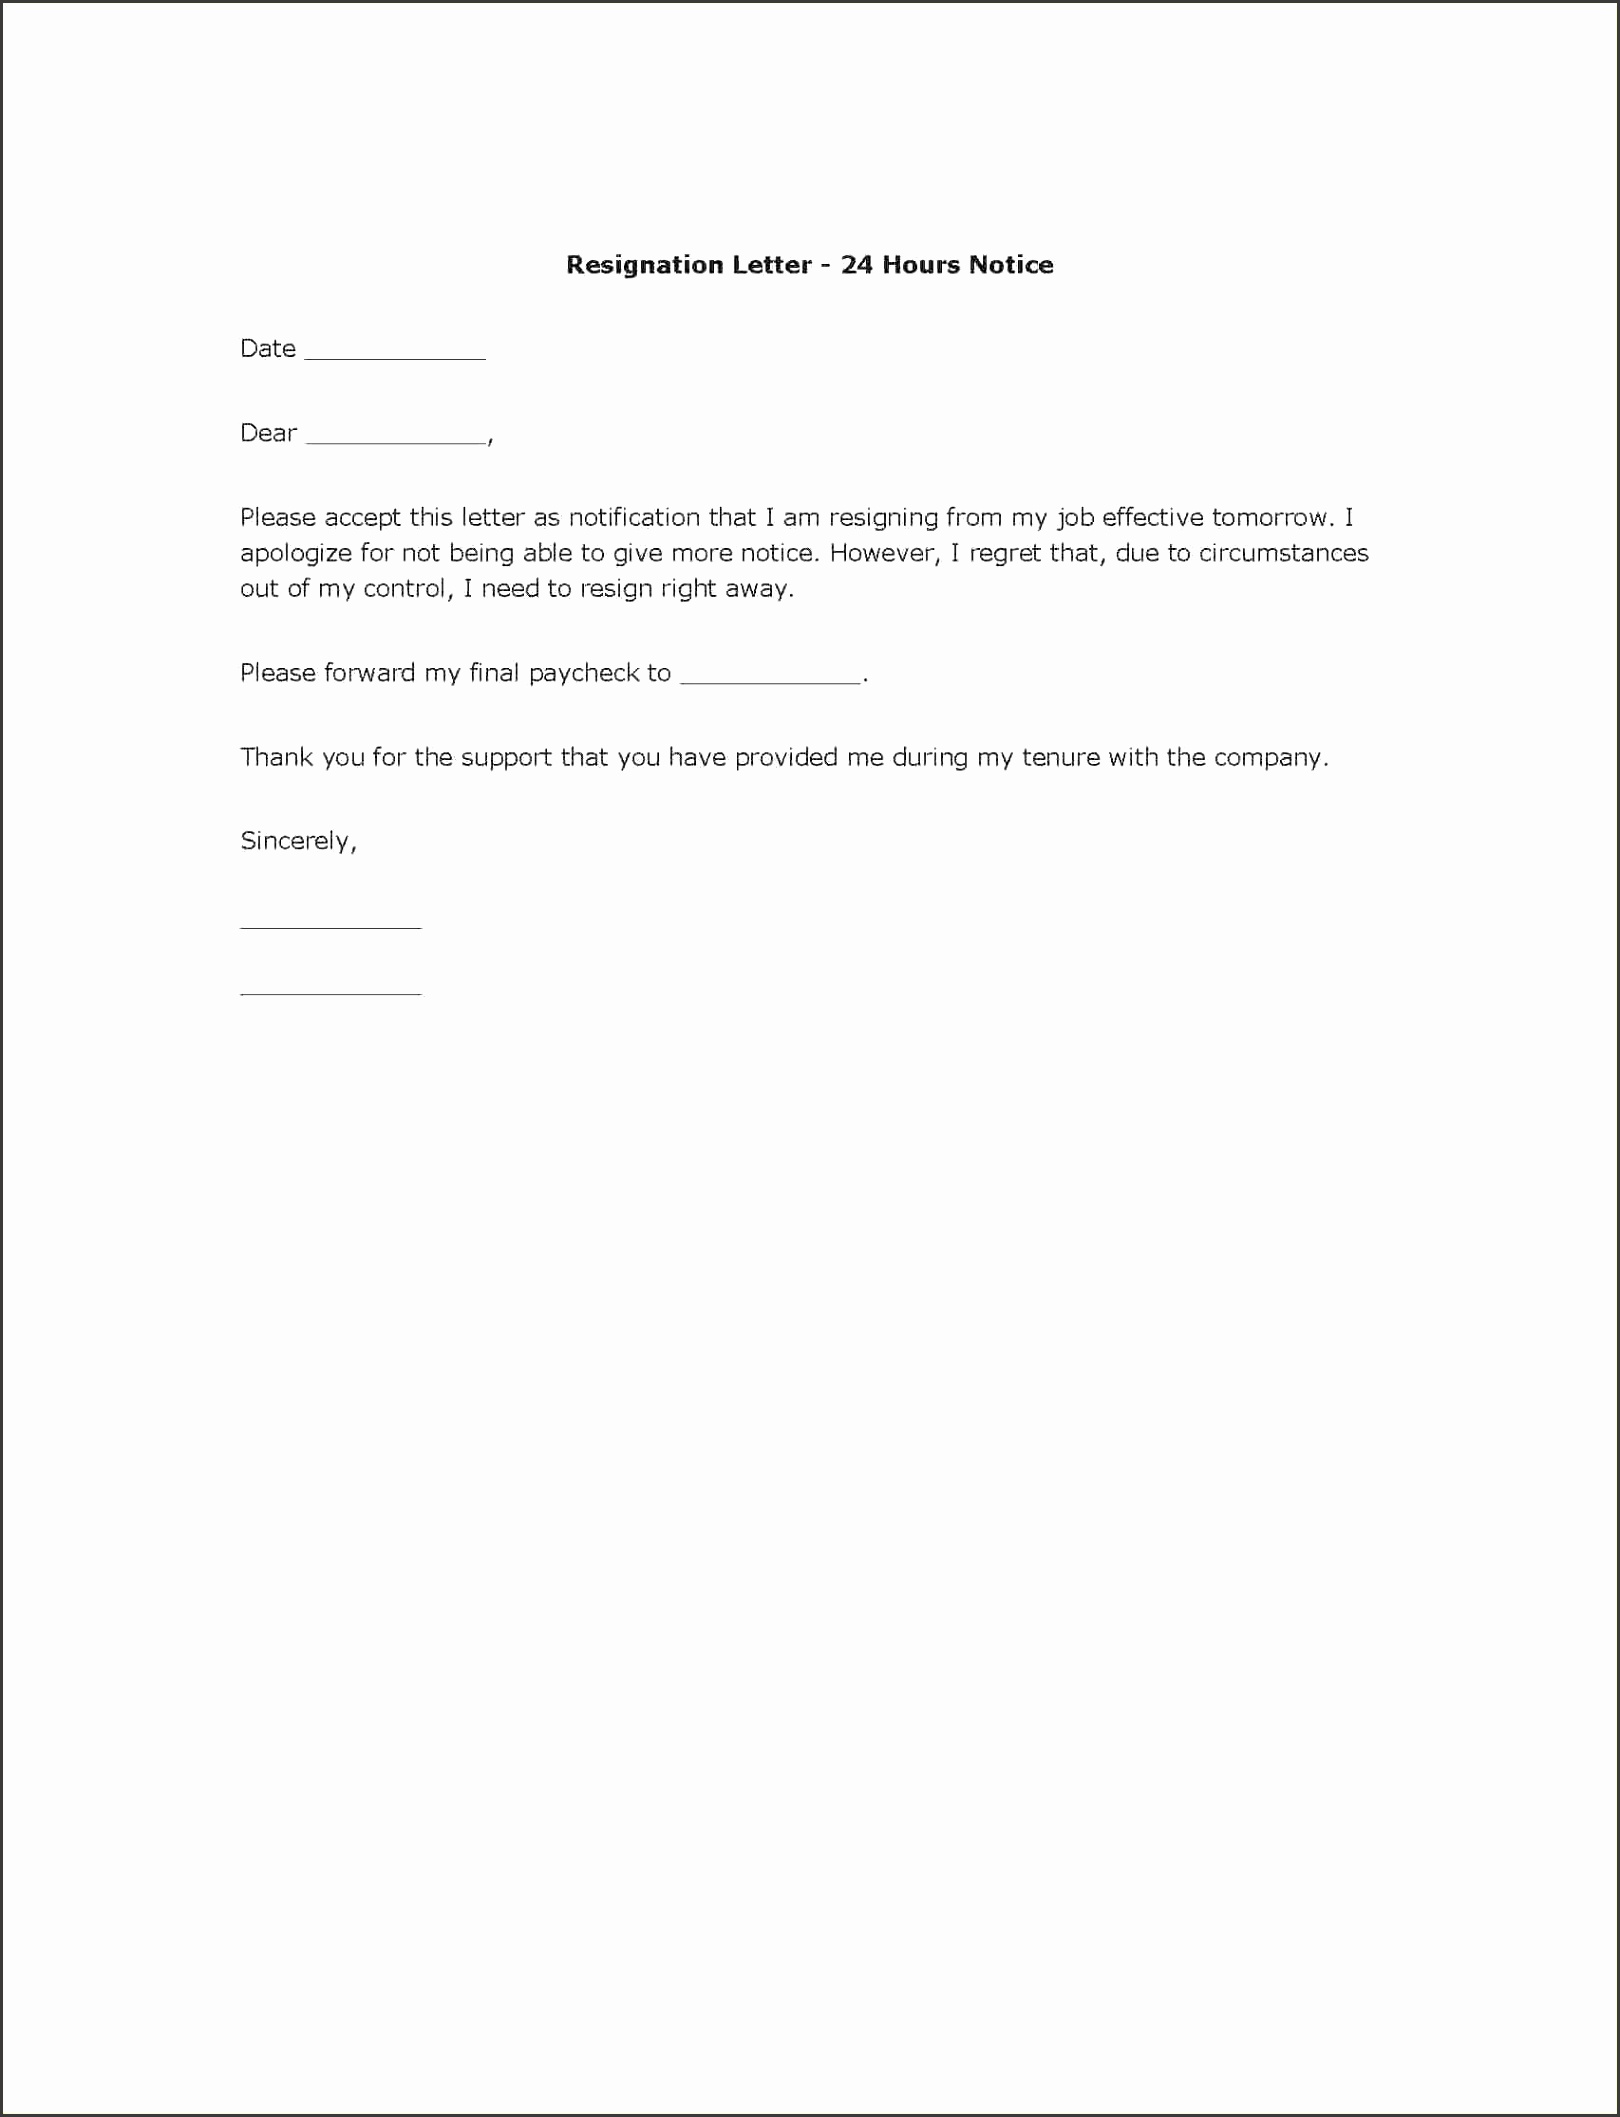 resignation letter sample pdfsign letter template pics word thank you sample